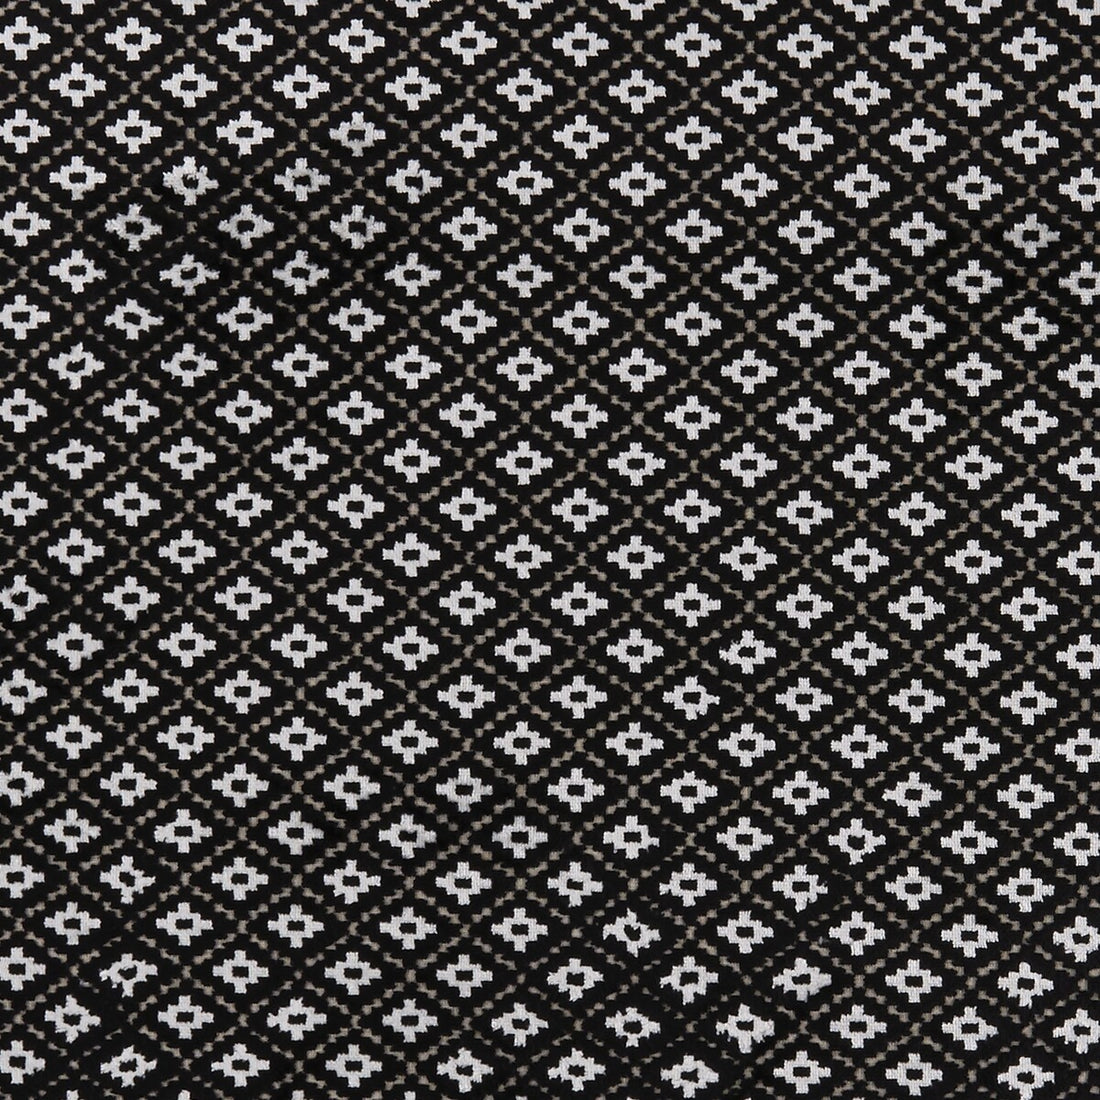 Bw1040 fabric in black/white color - pattern F0942/01.CAC.0 - by Clarke And Clarke in the Clarke &amp; Clarke Black + White collection